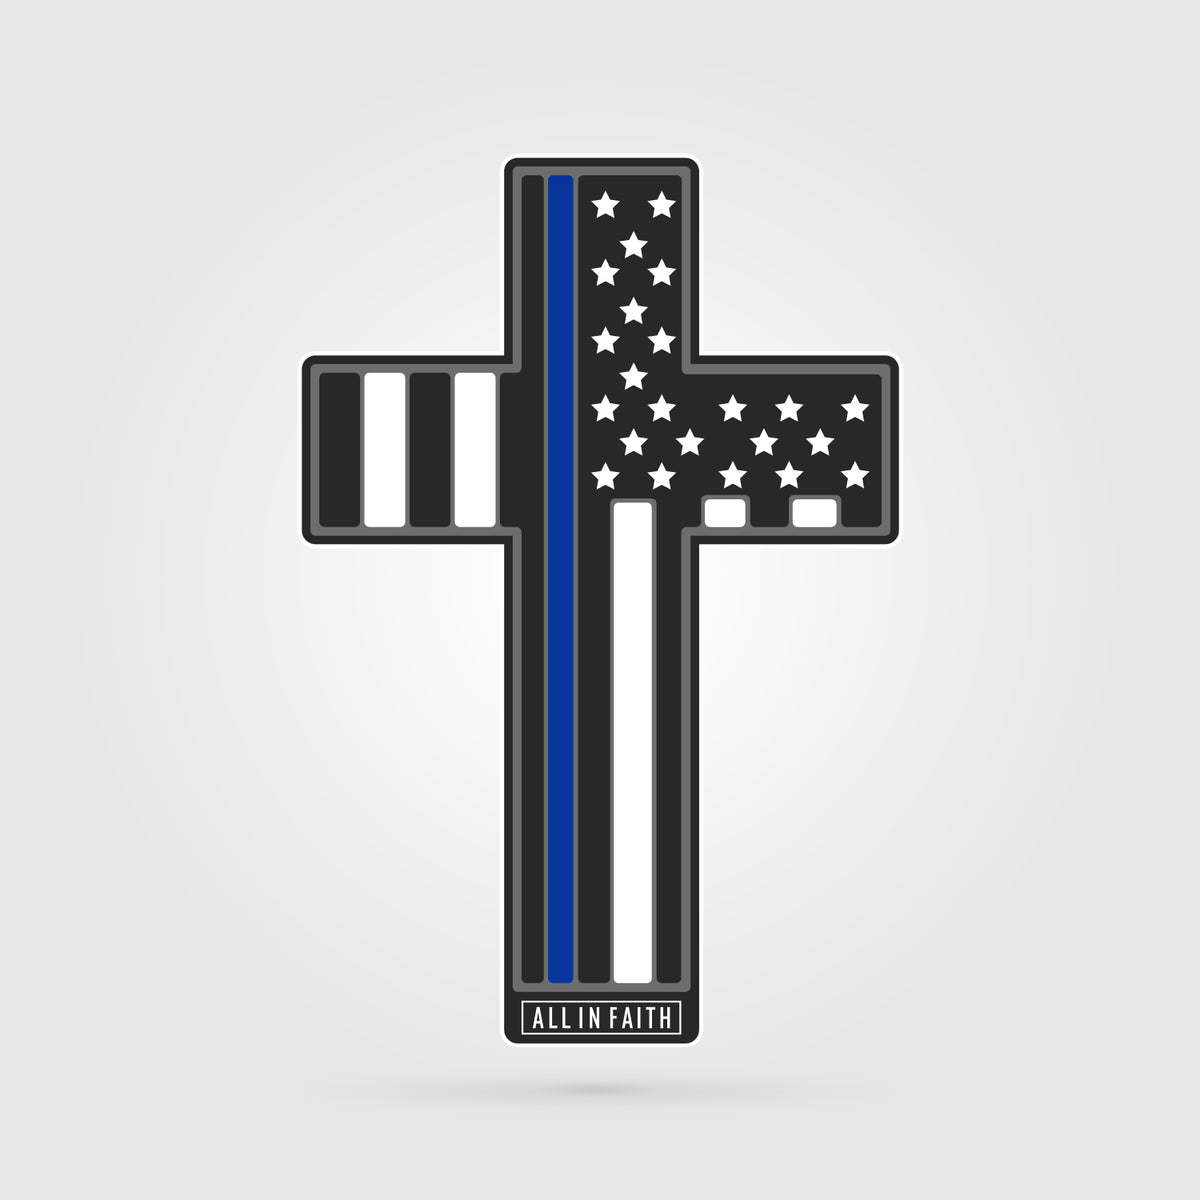 Police Thin Blue Line Cross Decal